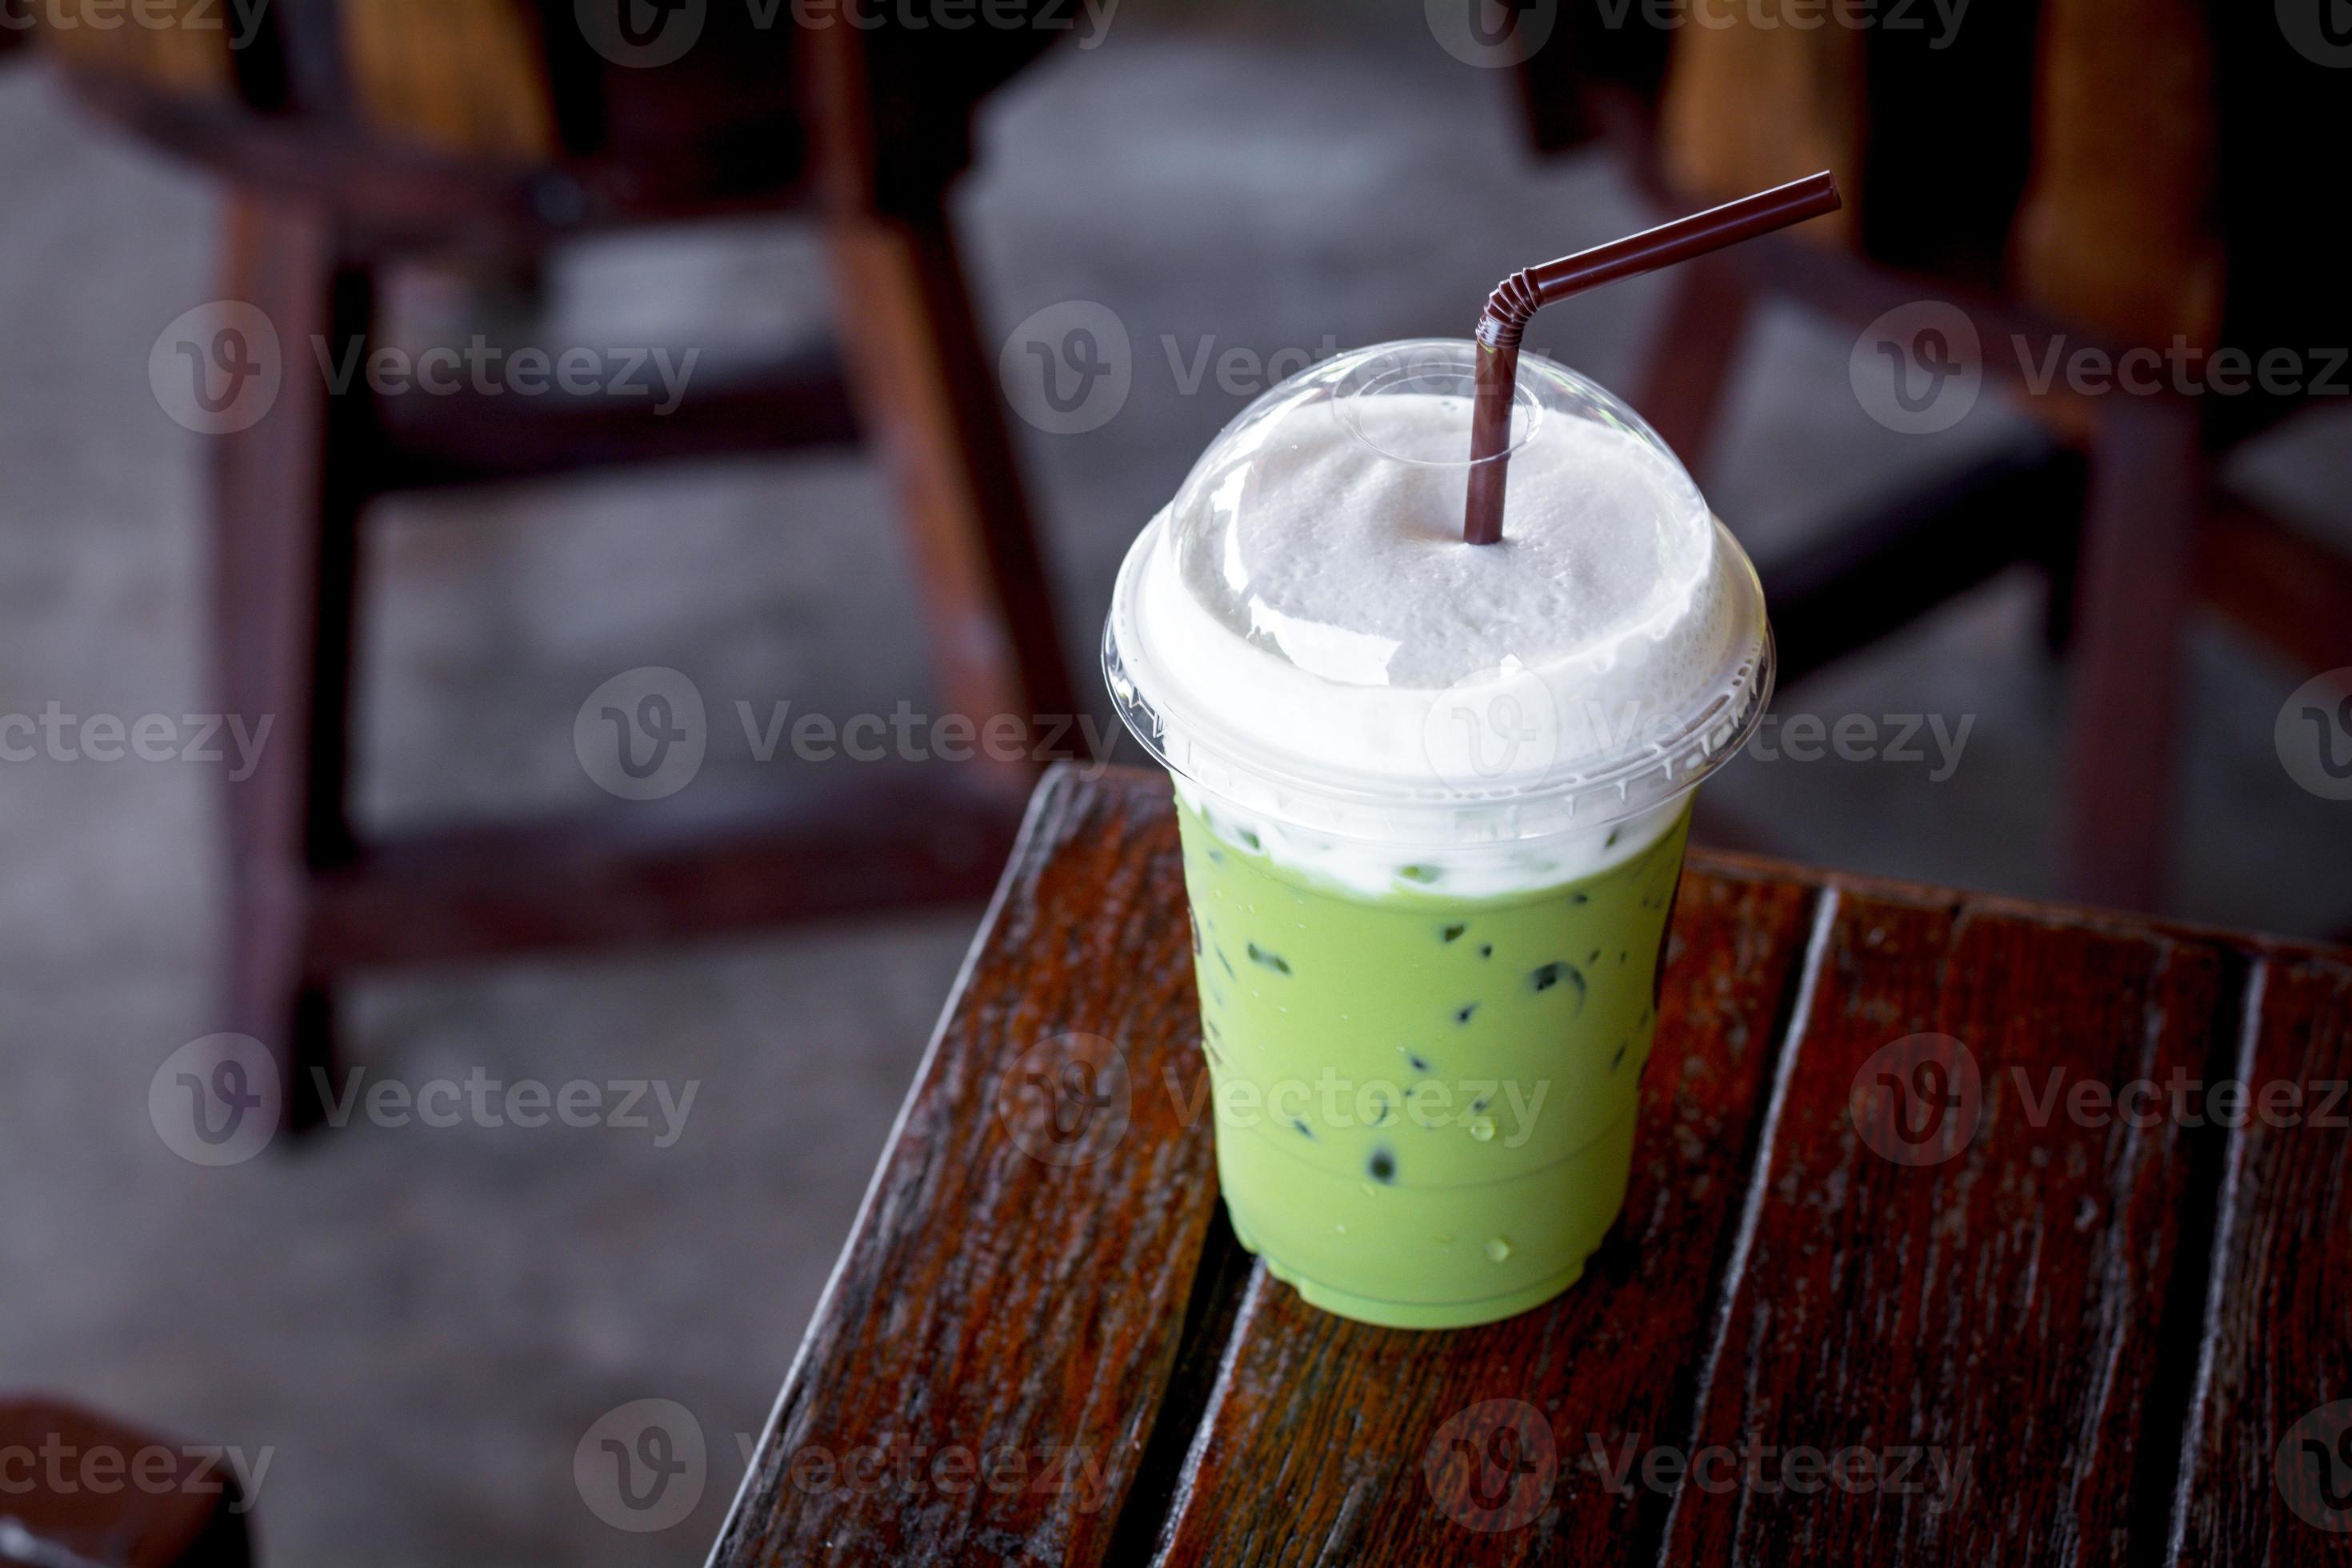 https://static.vecteezy.com/system/resources/previews/006/036/189/large_2x/iced-green-tea-or-matcha-latte-with-milk-foam-in-a-plastic-cup-with-brown-straw-on-a-wooden-table-in-the-coffee-shop-healthy-drink-and-beverage-concept-photo.jpg